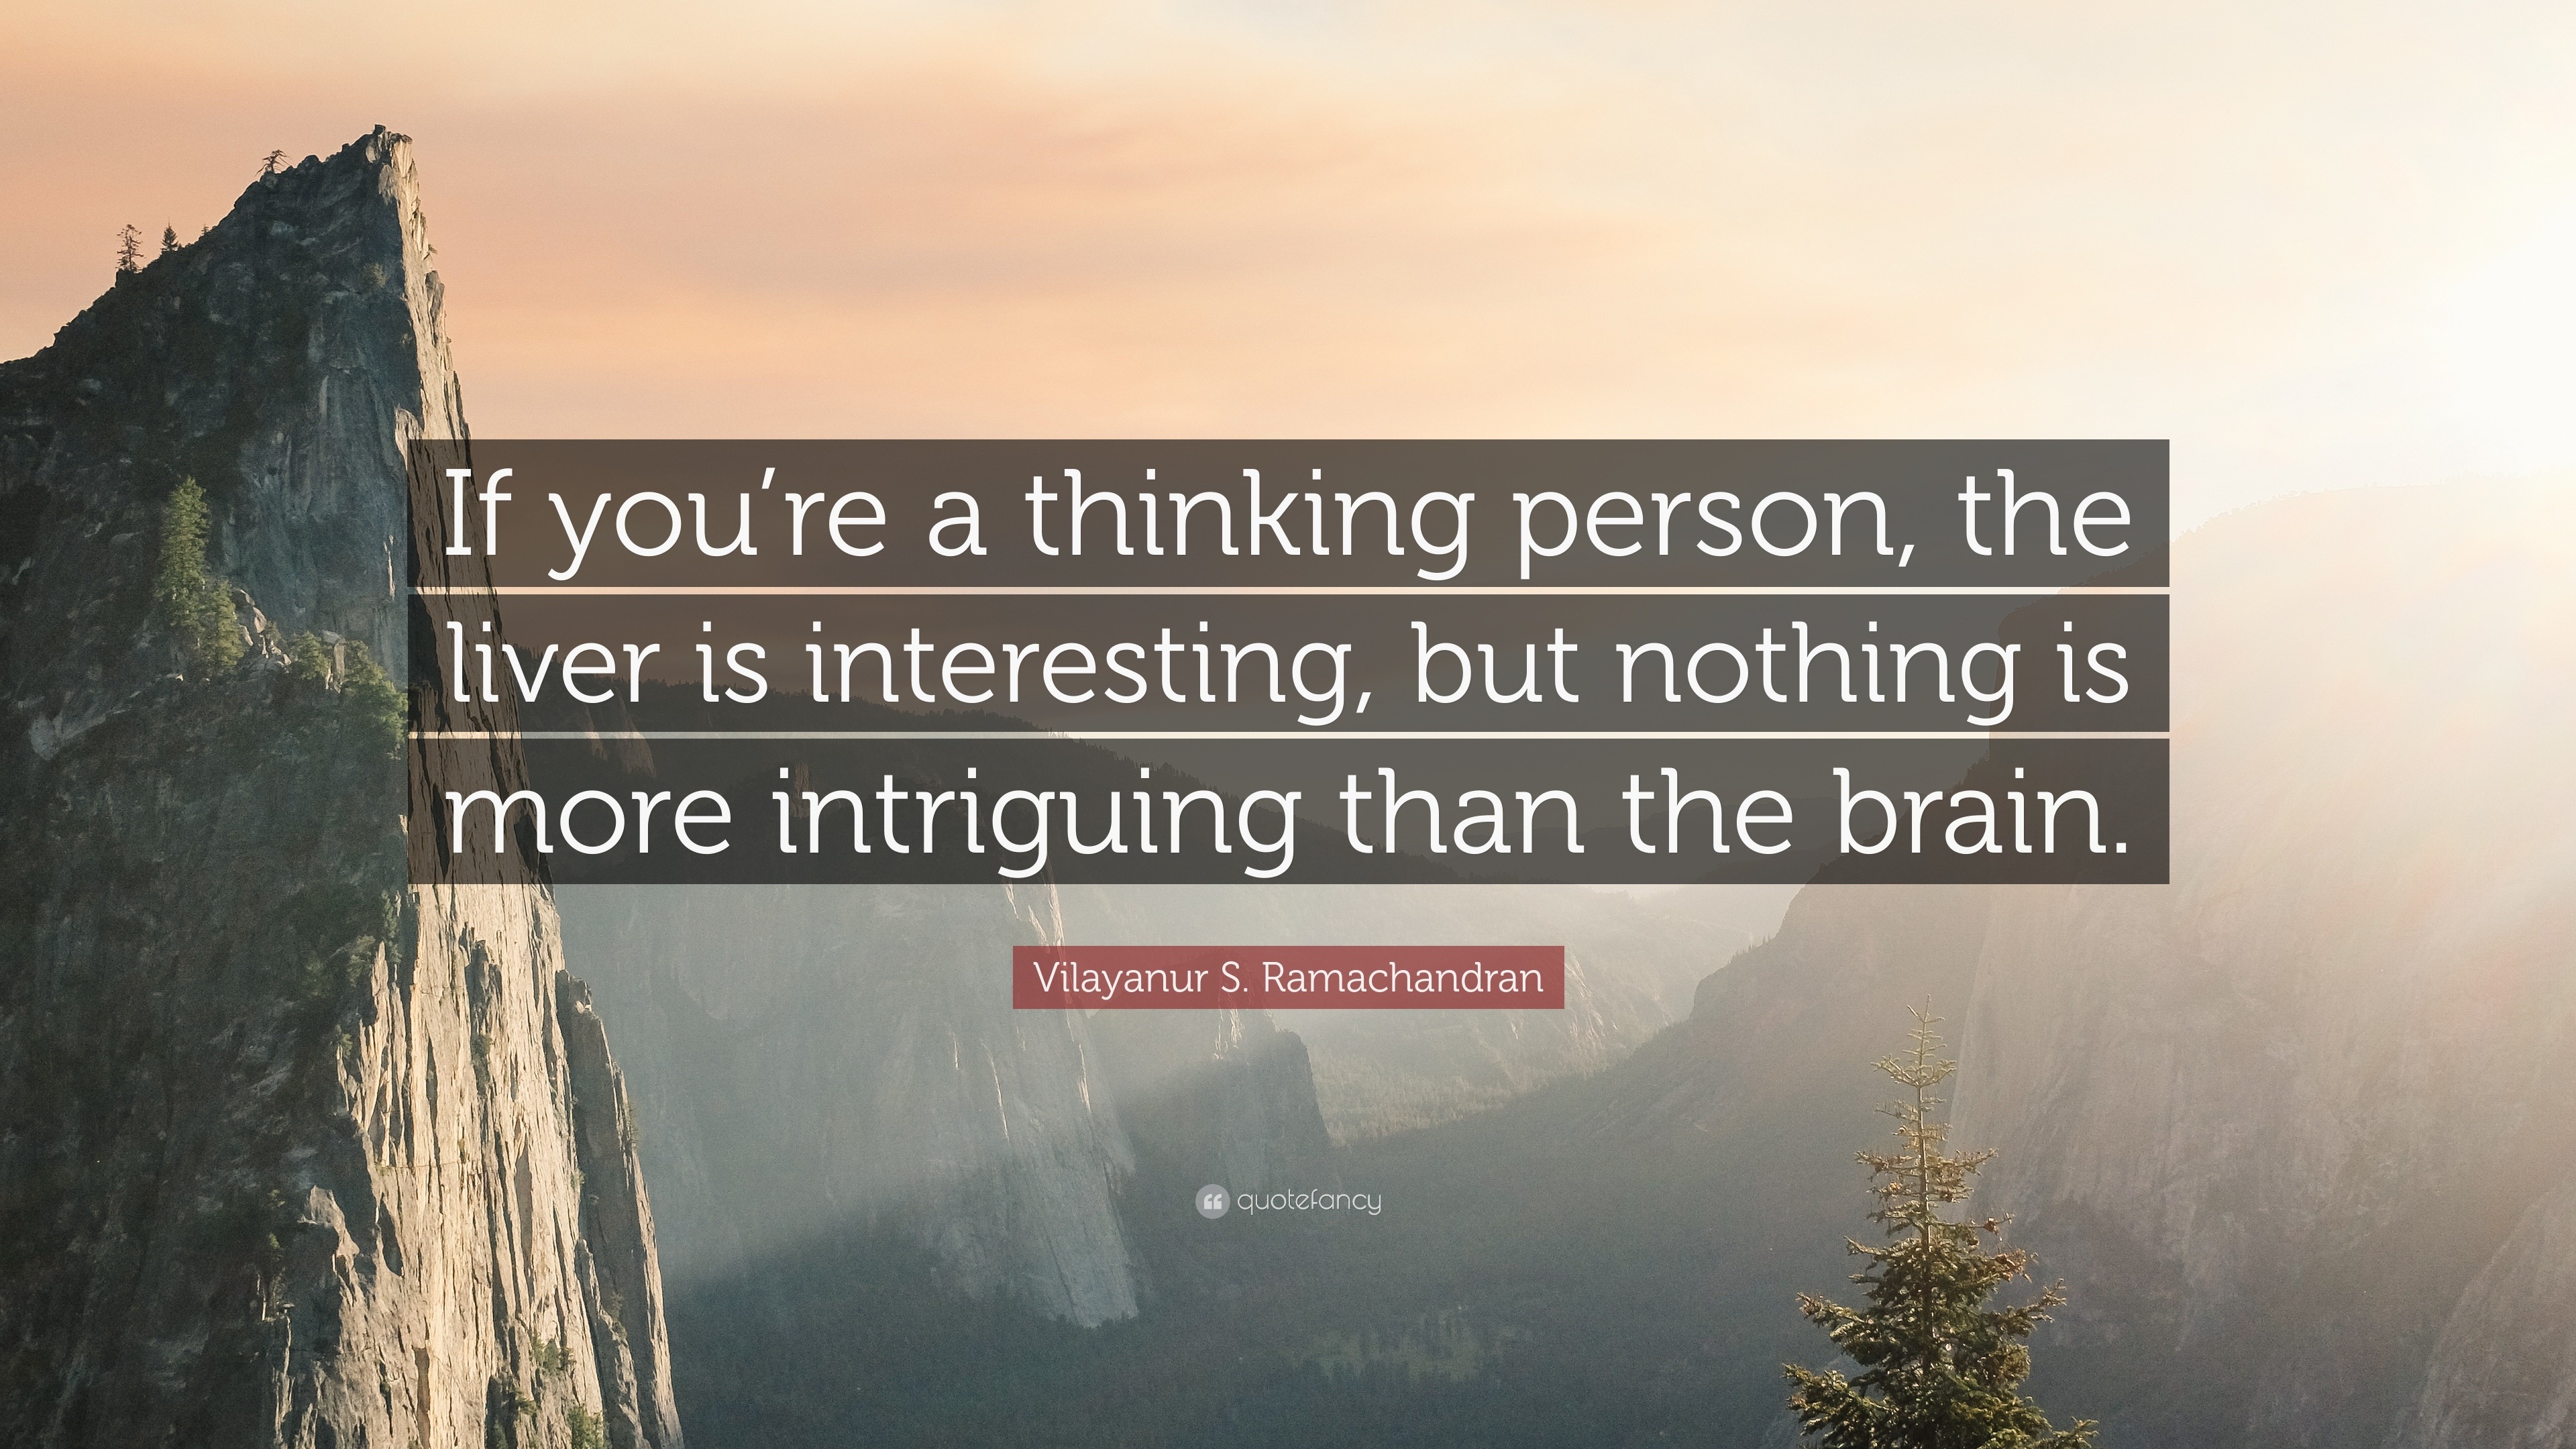 Vilayanur S. Ramachandran Quote: “If you’re a thinking person, the ...